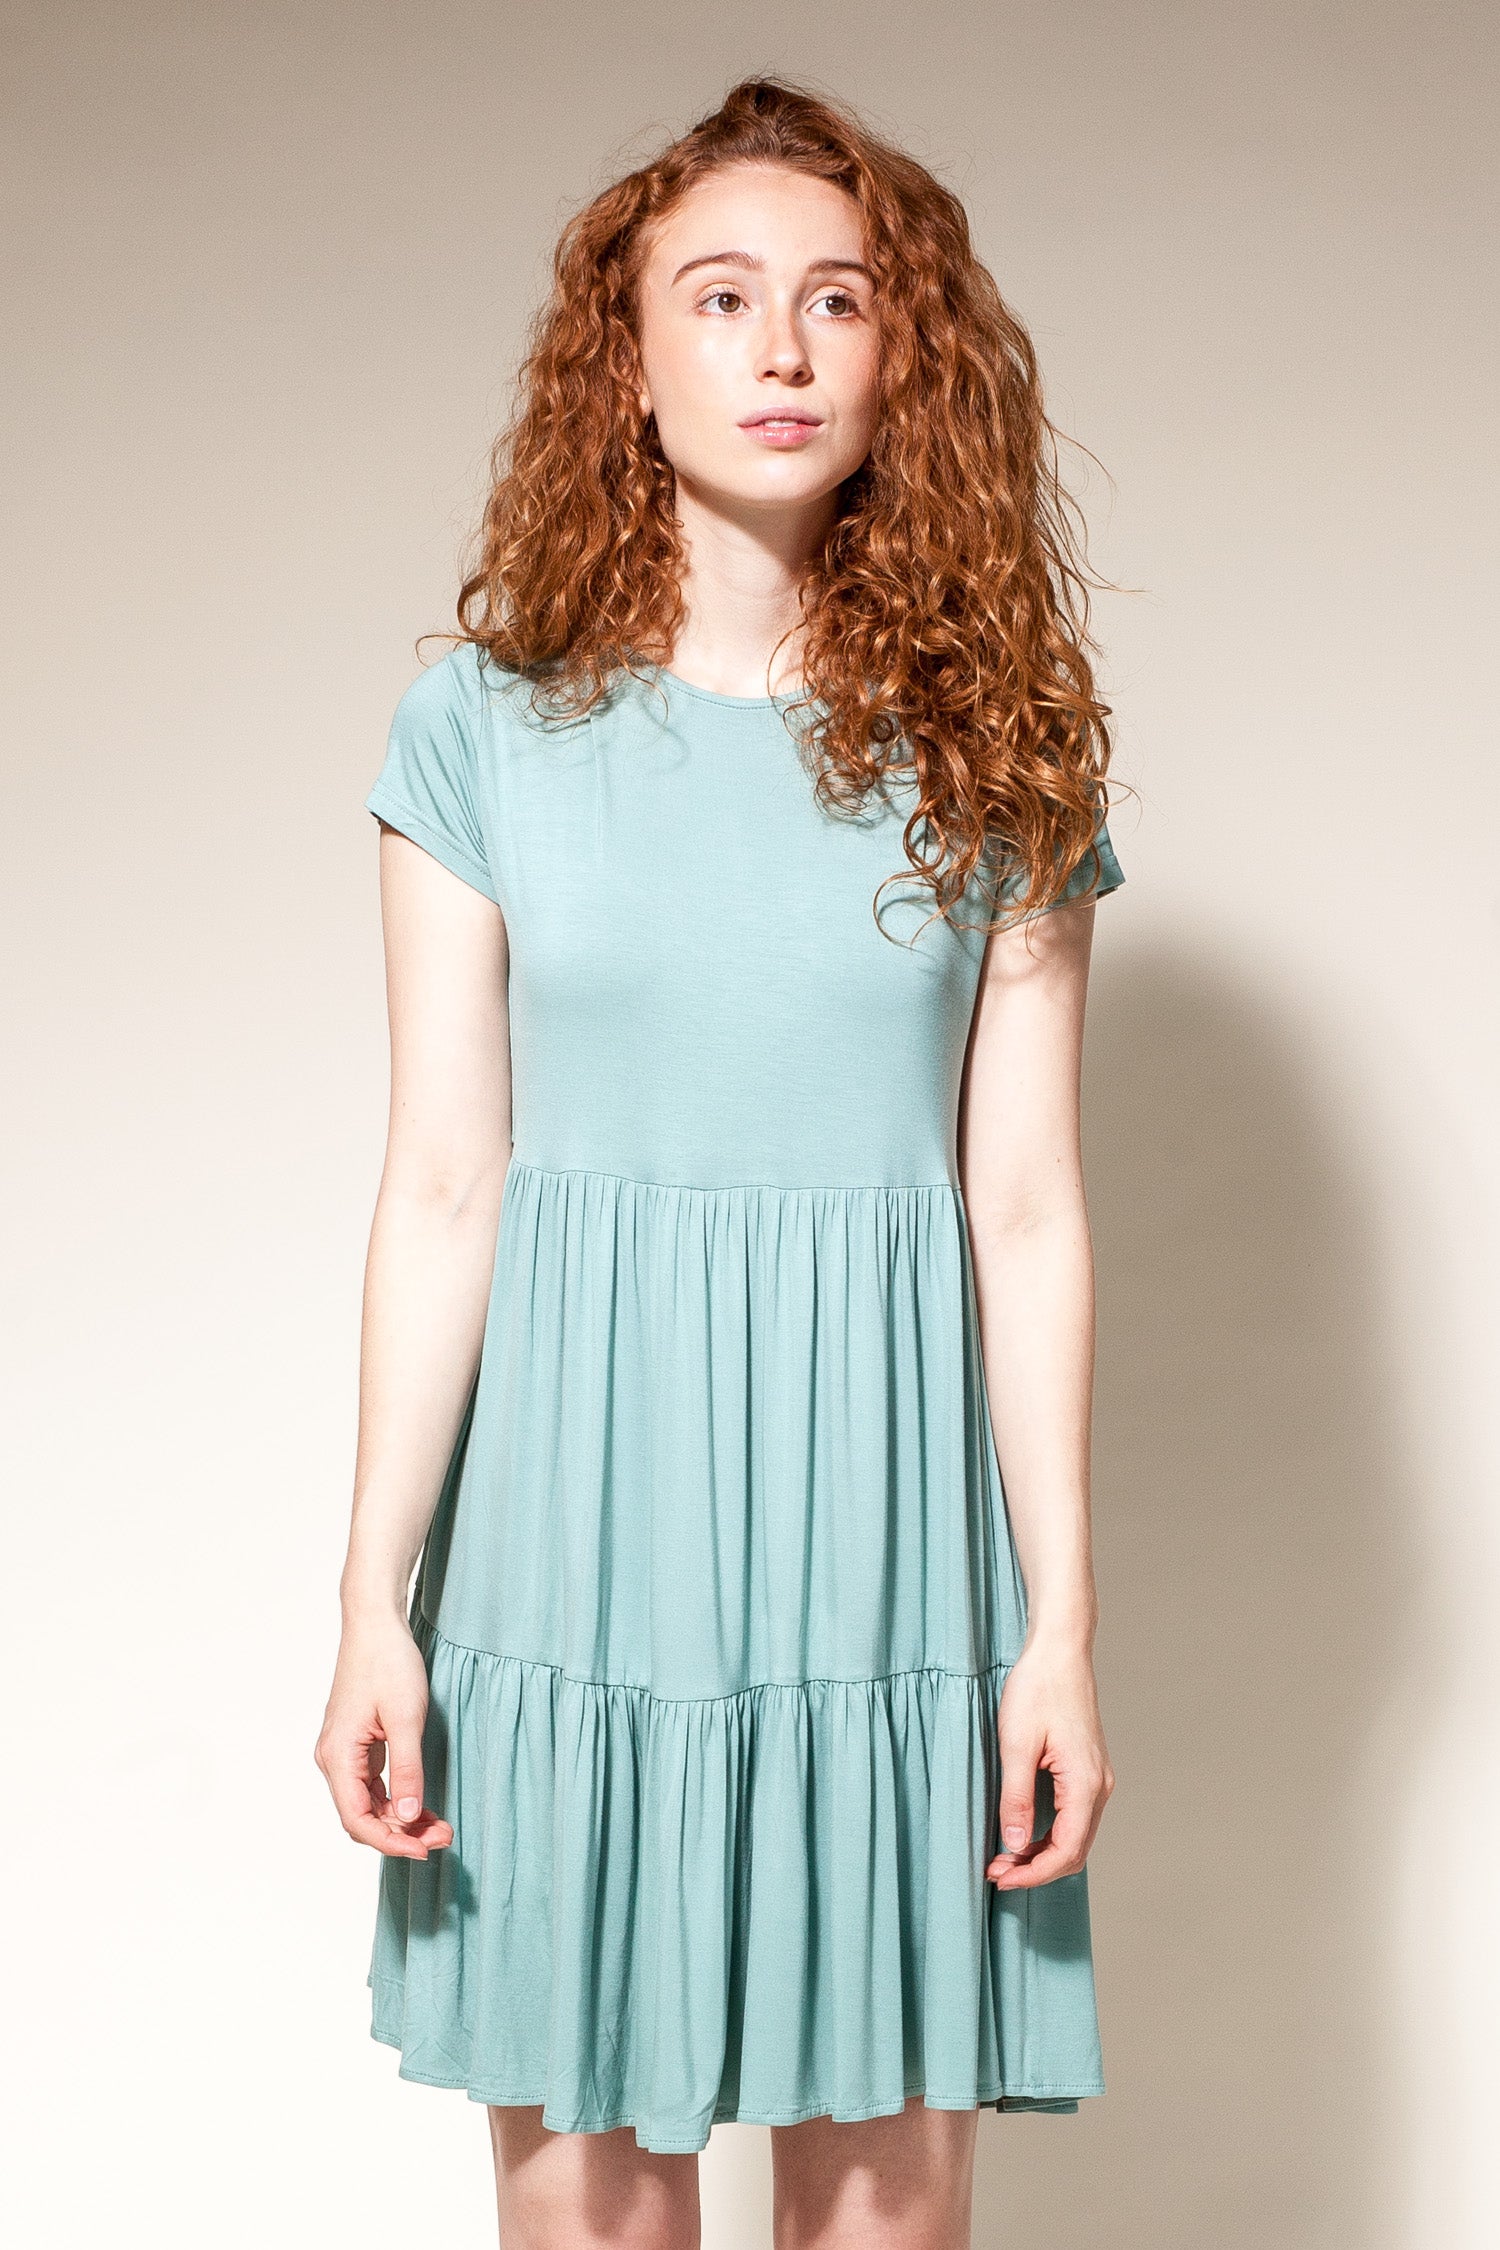 Lola Dress Green - Pink Martini Collection